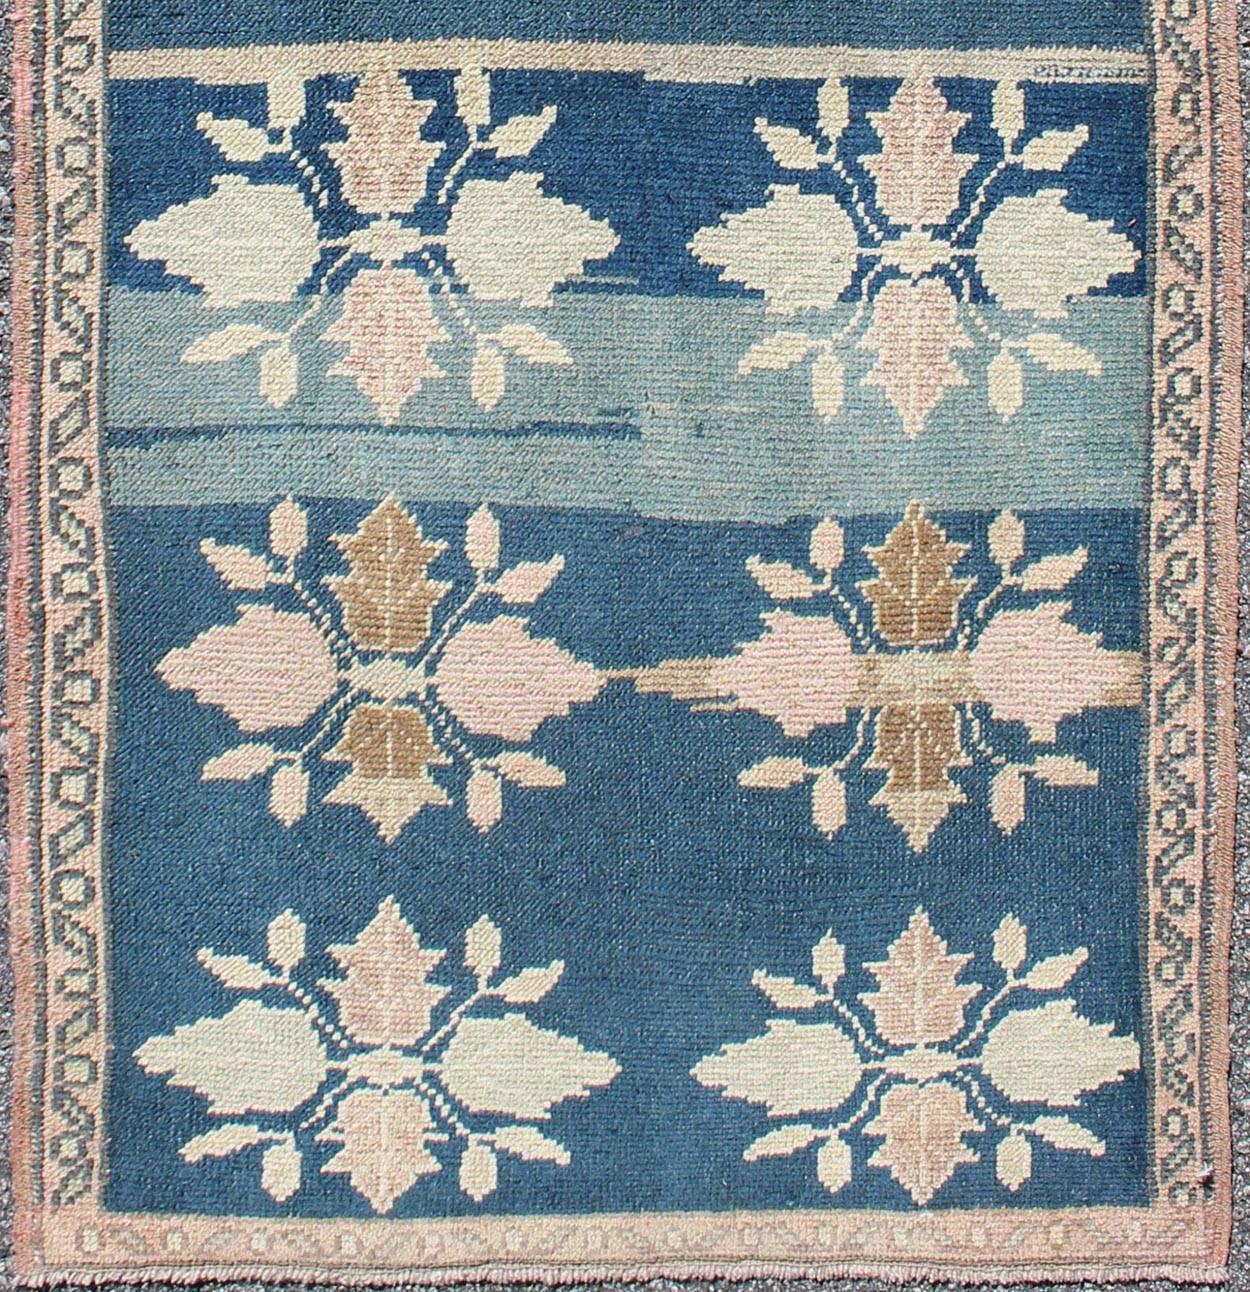 Multi-medallion floral midcentury Turkish Oushak runner in blue and pink, rug en-112252, country of origin type: Turkey Tulu, circa 1950

This Oushak carpet (circa mid-20th century) features a multitude of blossom medallions spread throughout the